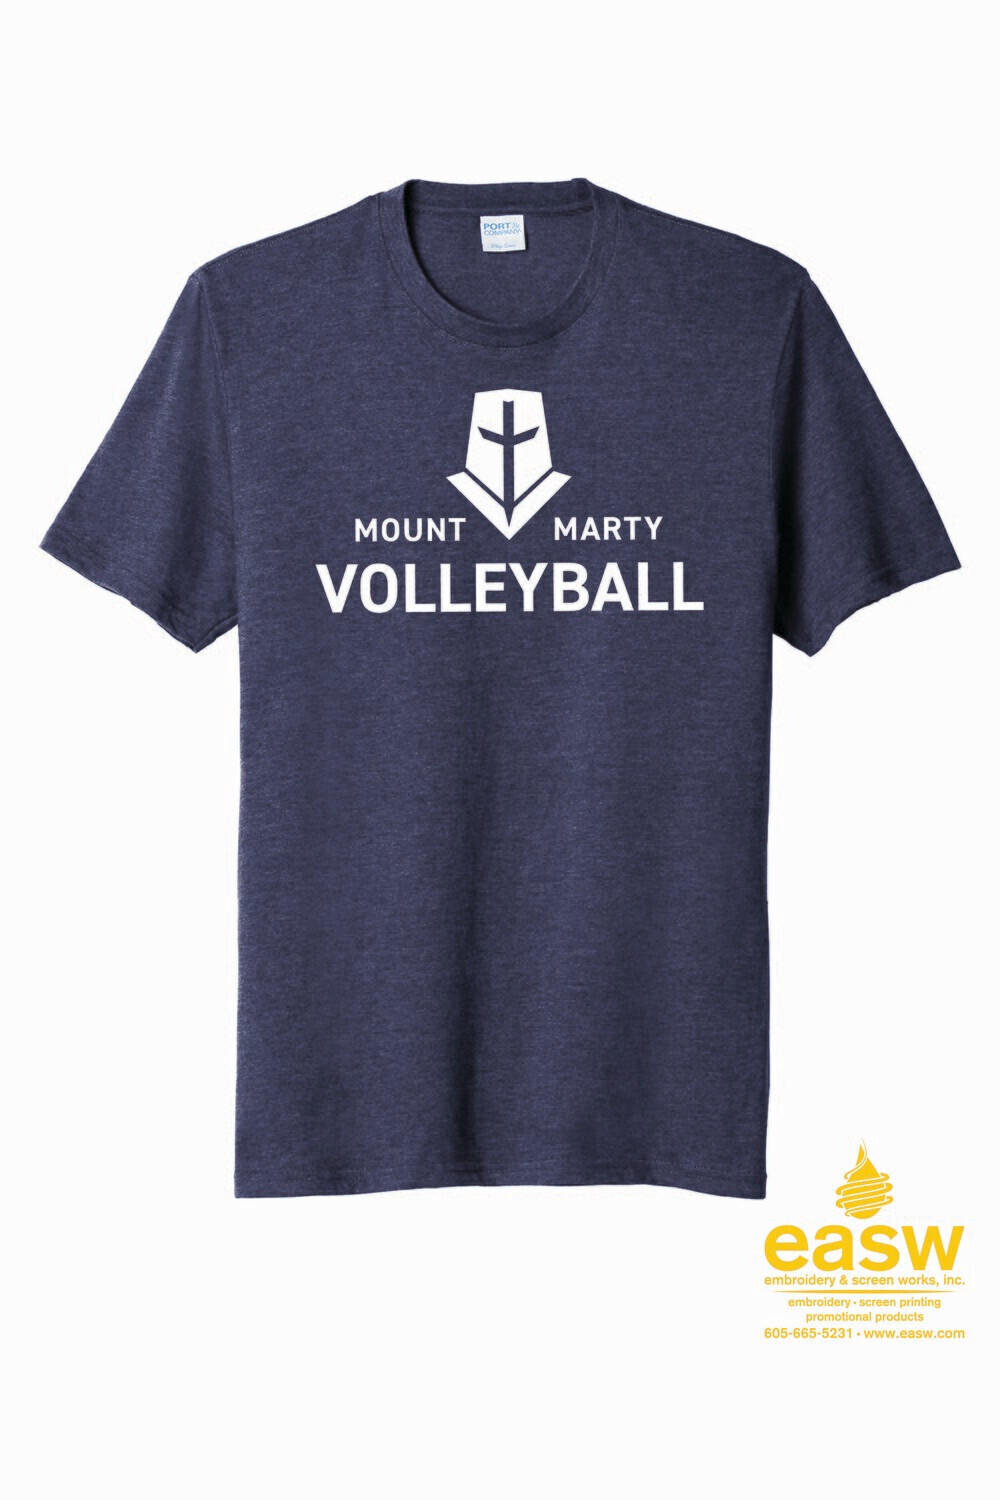 Volleyball Tees